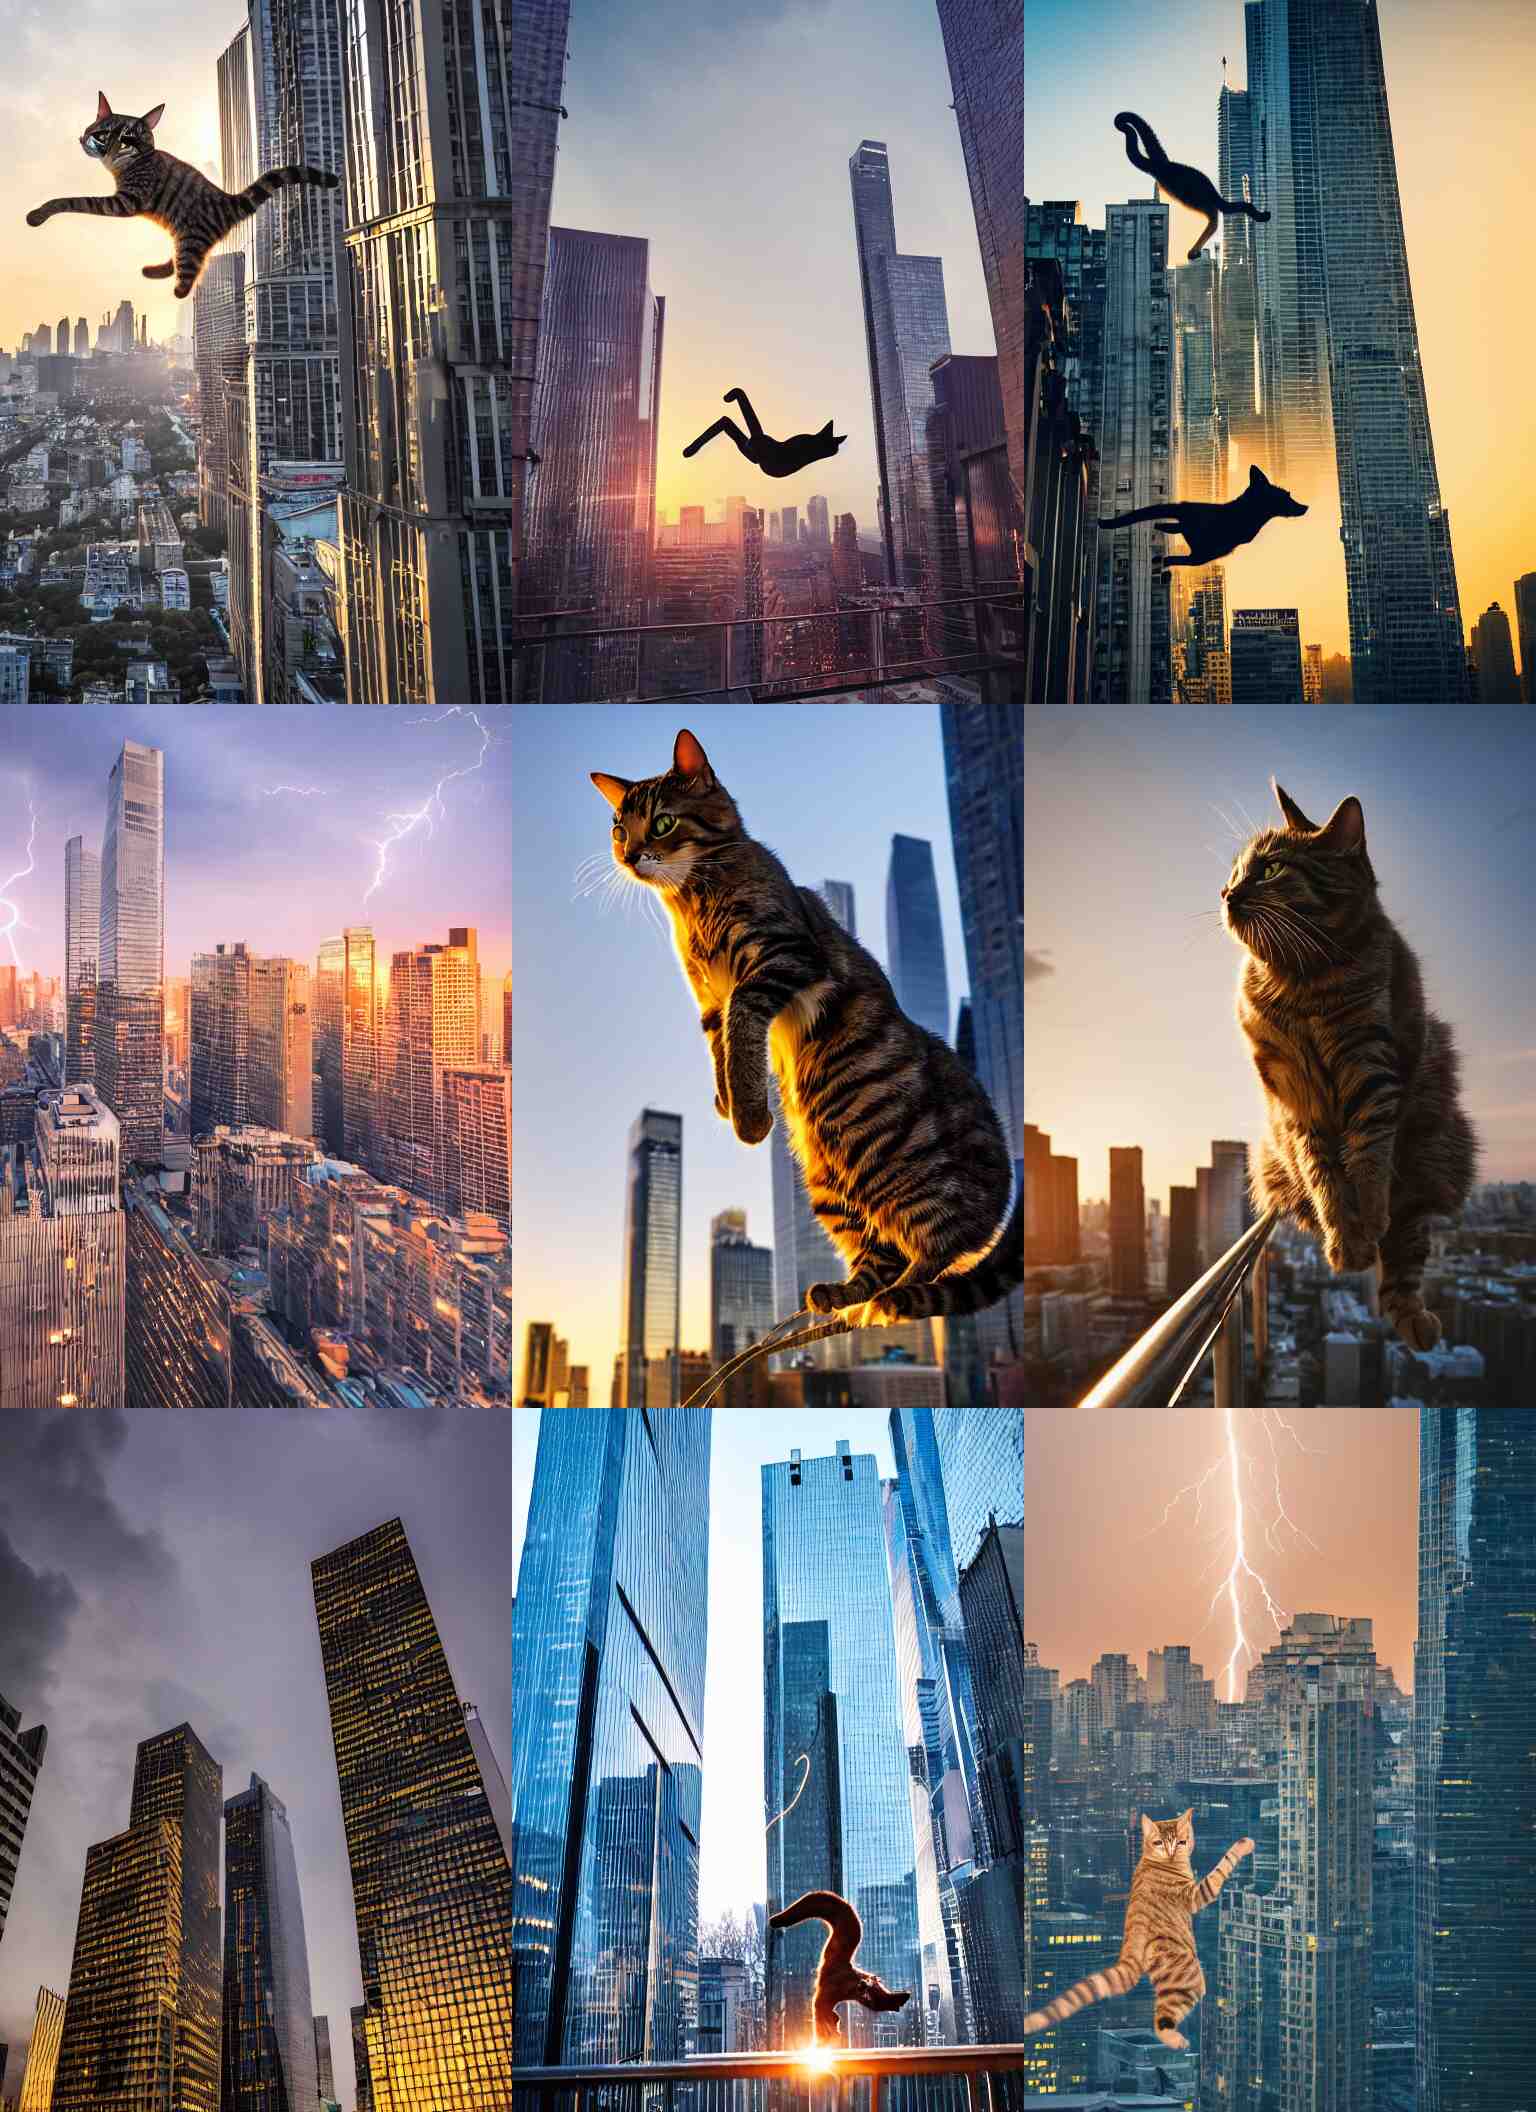 How To Use An API For Photo Editing In 2023